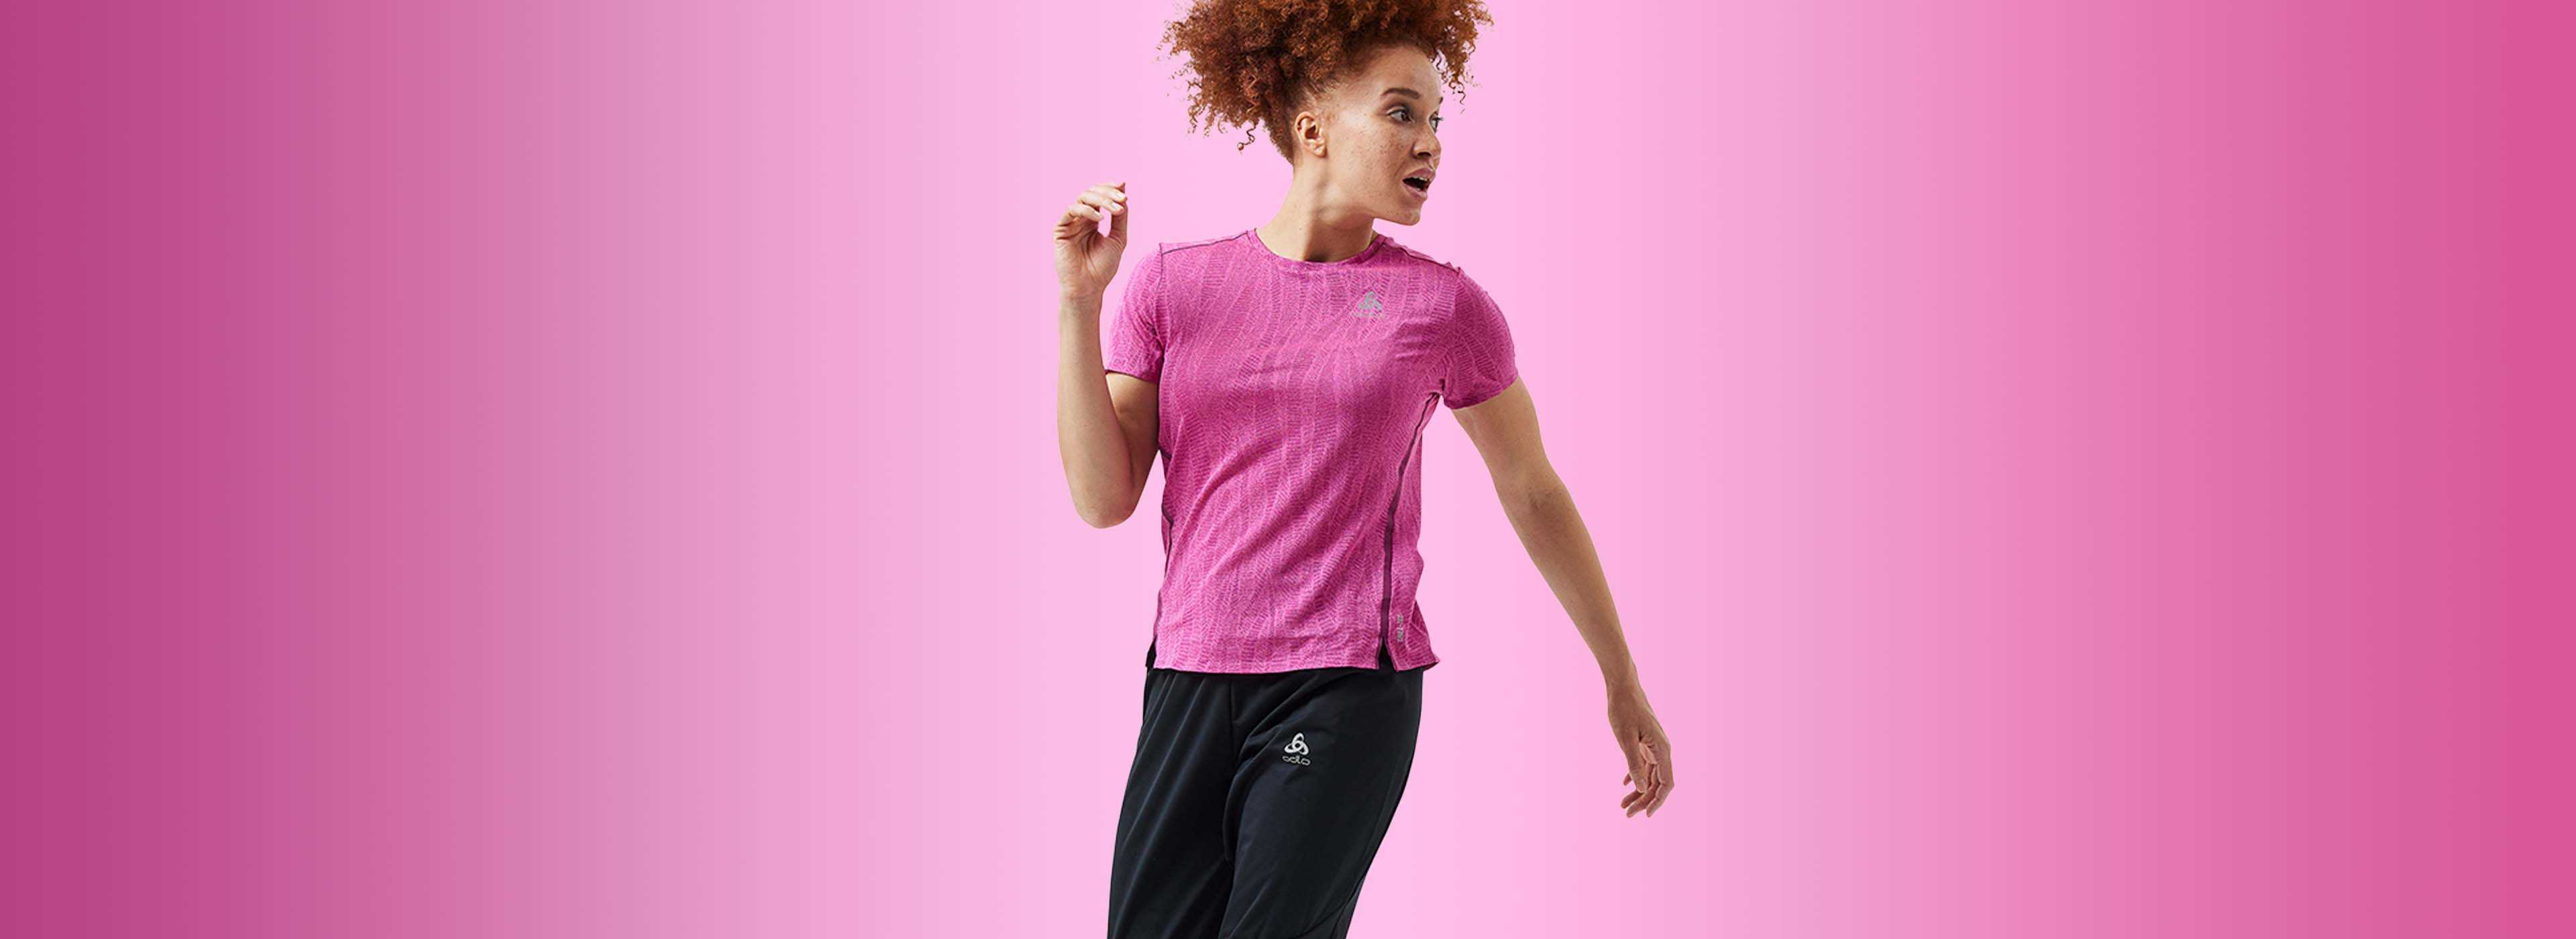 a woman wearing a light training outfit and jumping